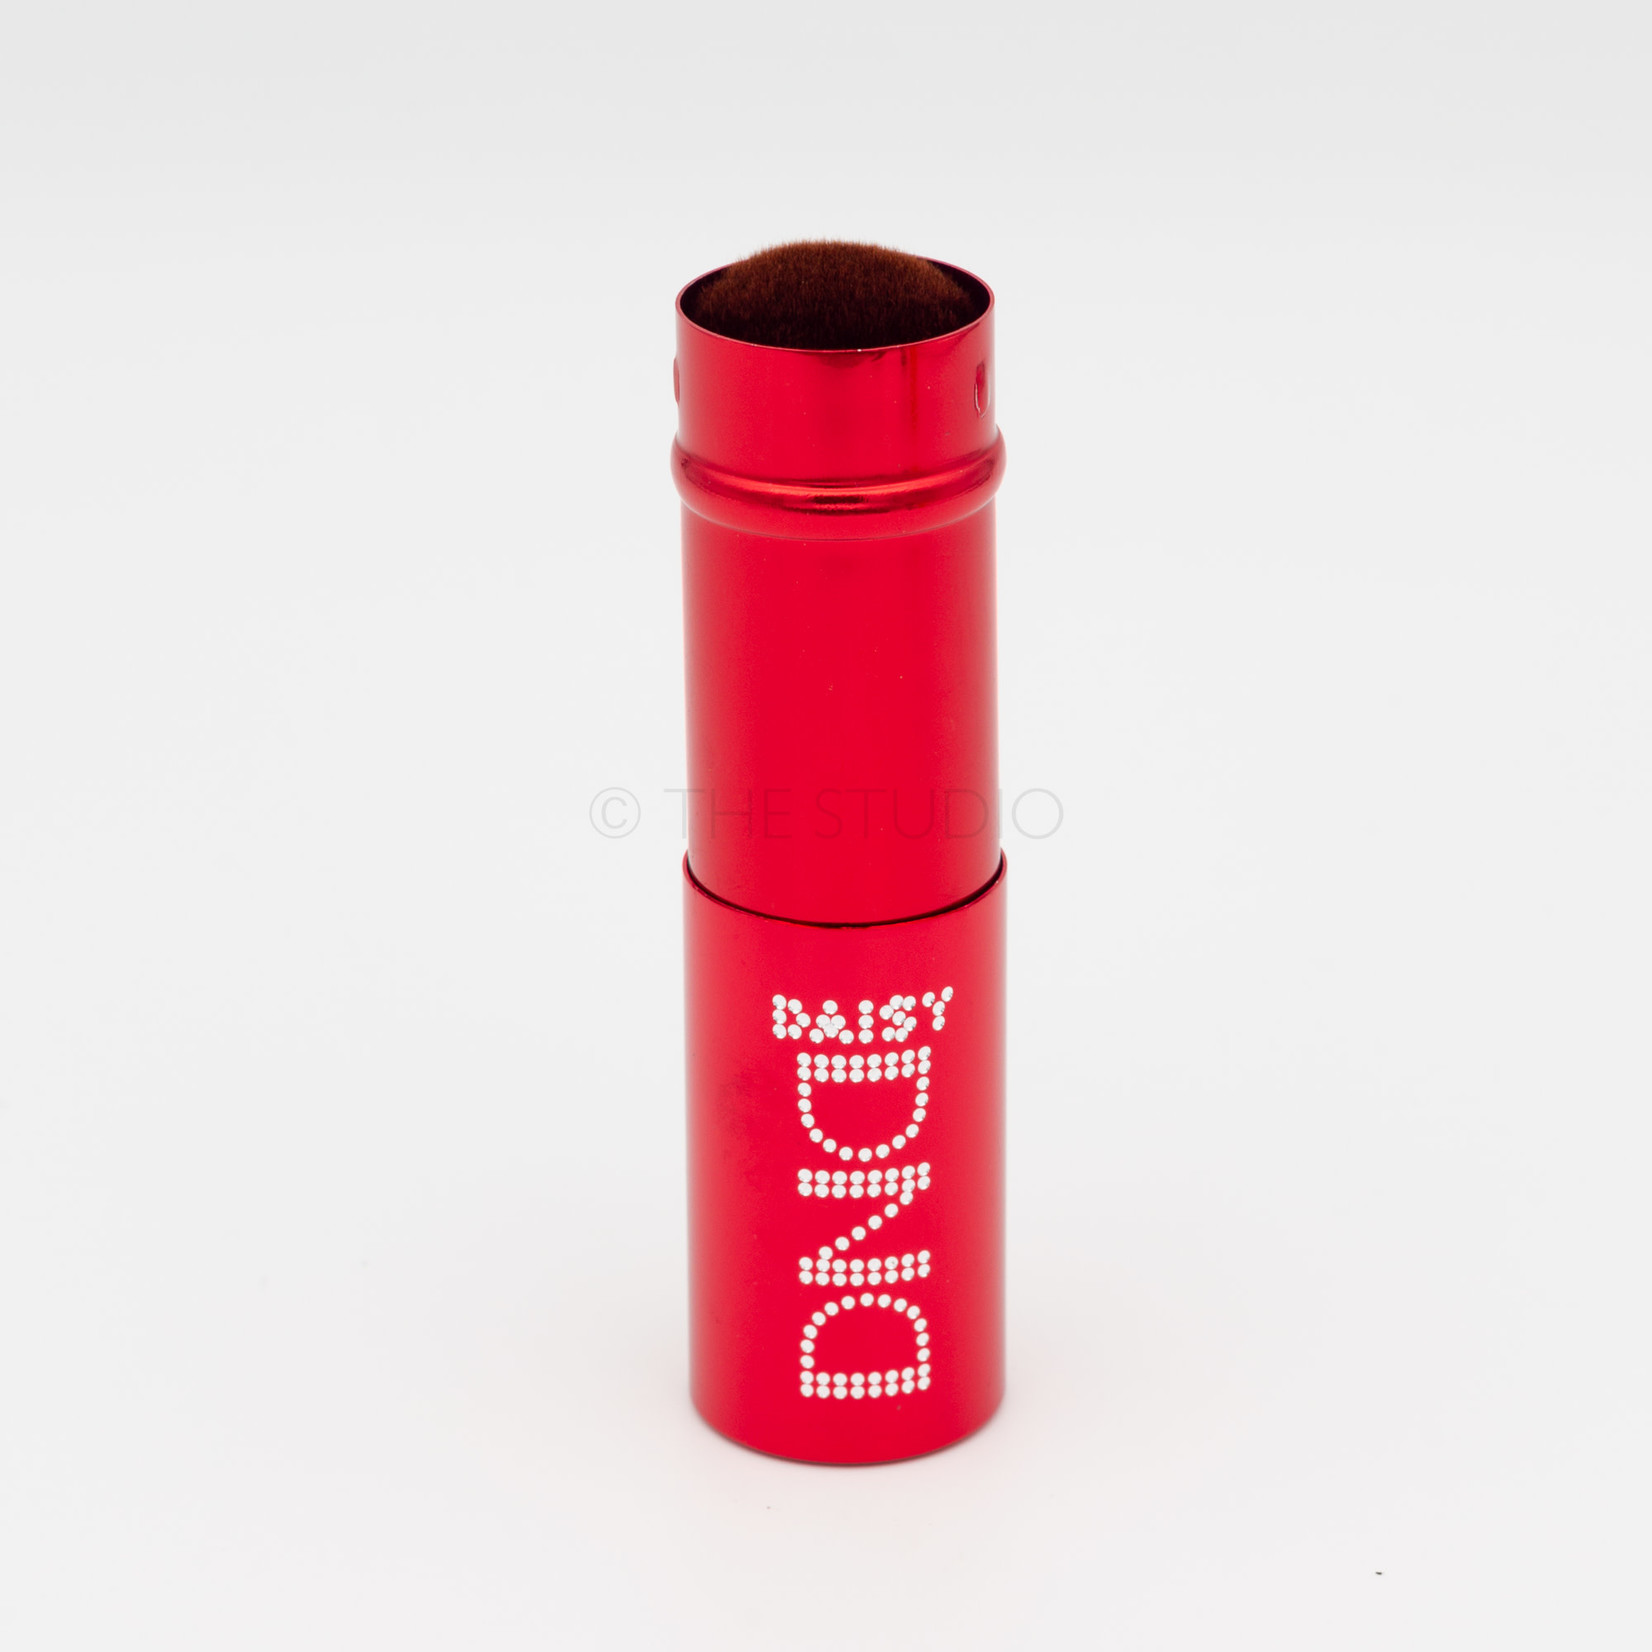 DND DND - Nail Dust Brush - Red - Large